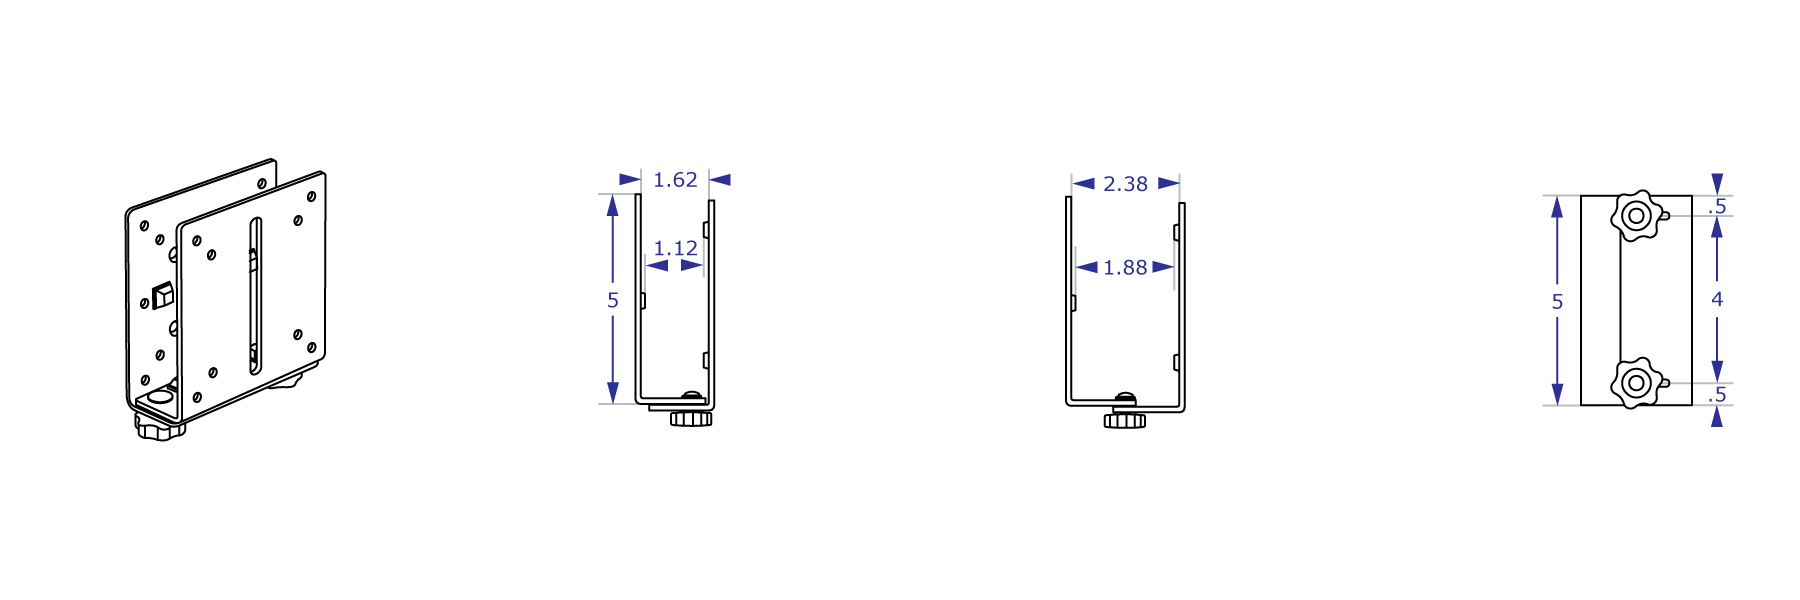 THINCPU regular thin client CPU holder specification drawings showing thinnest and widest settings and other dimensions